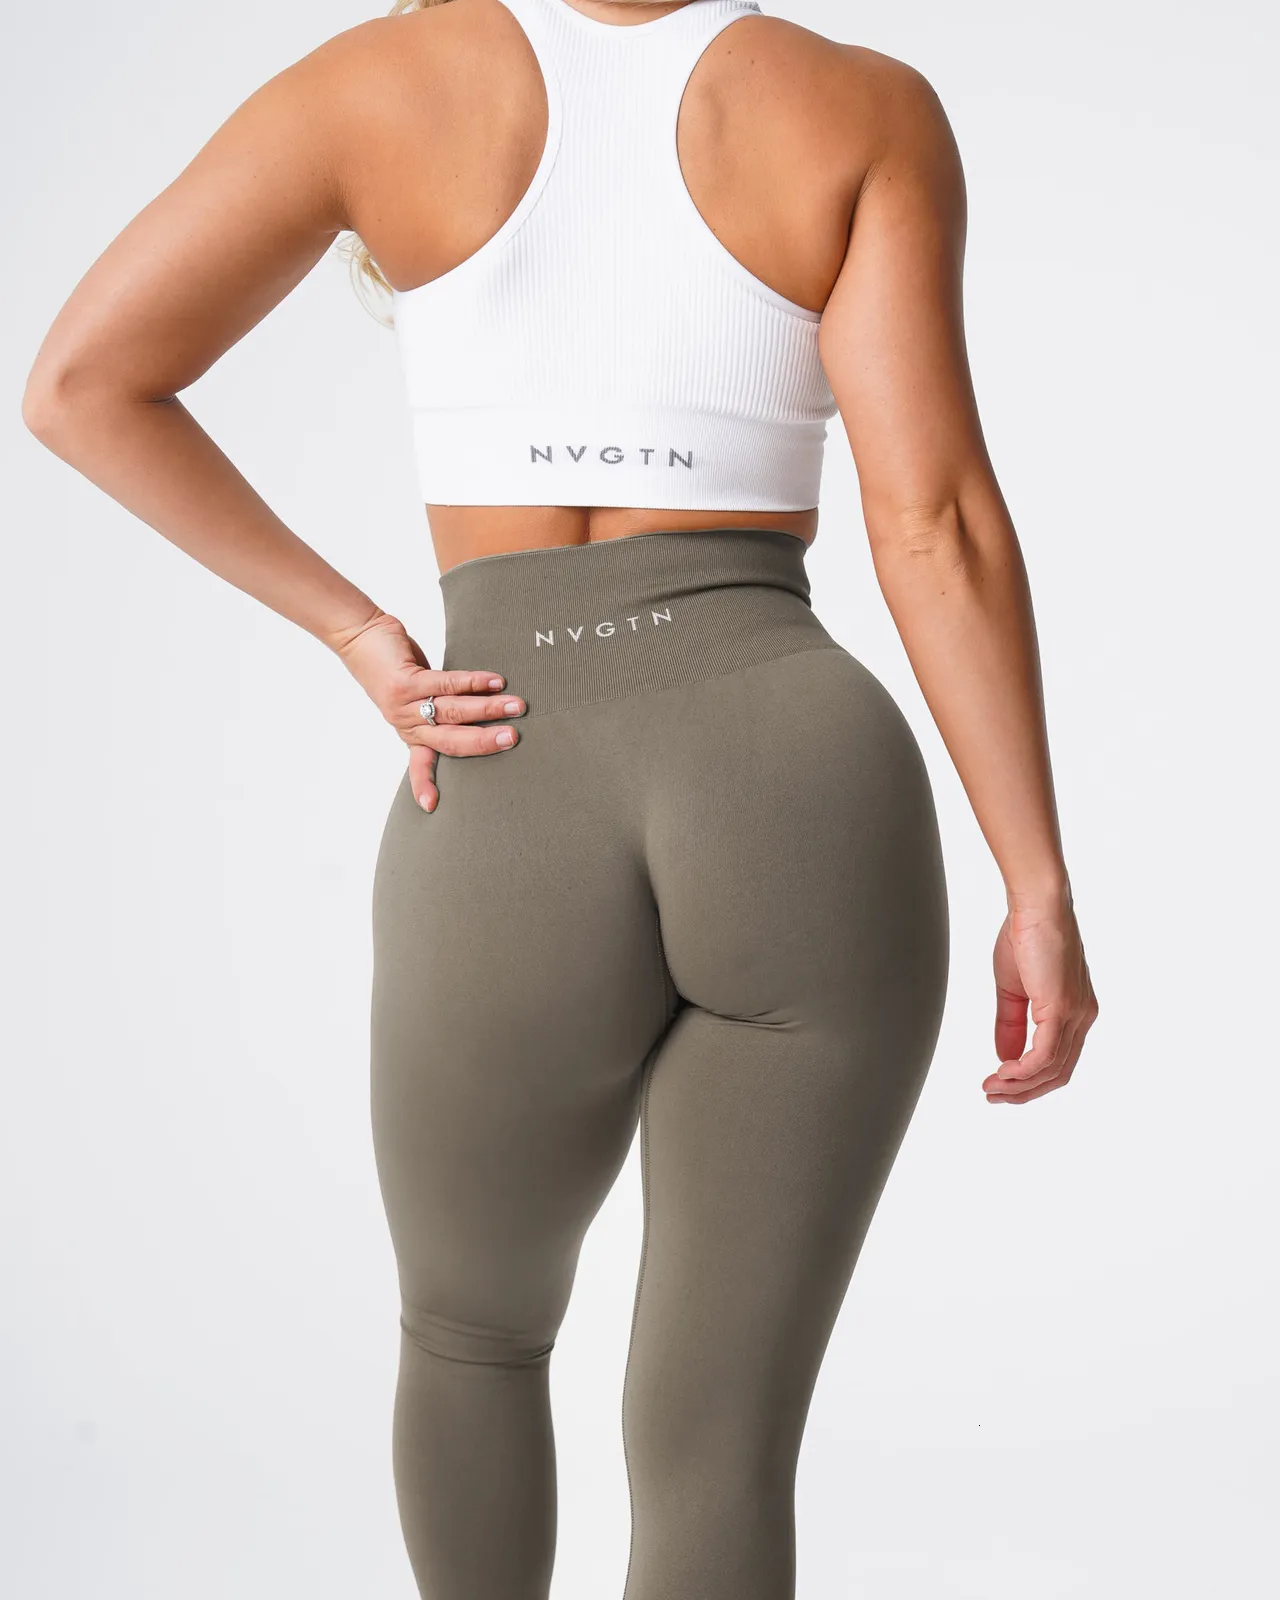 NVGTN Womens High Waisted Spandex Crossover Leggings Solid